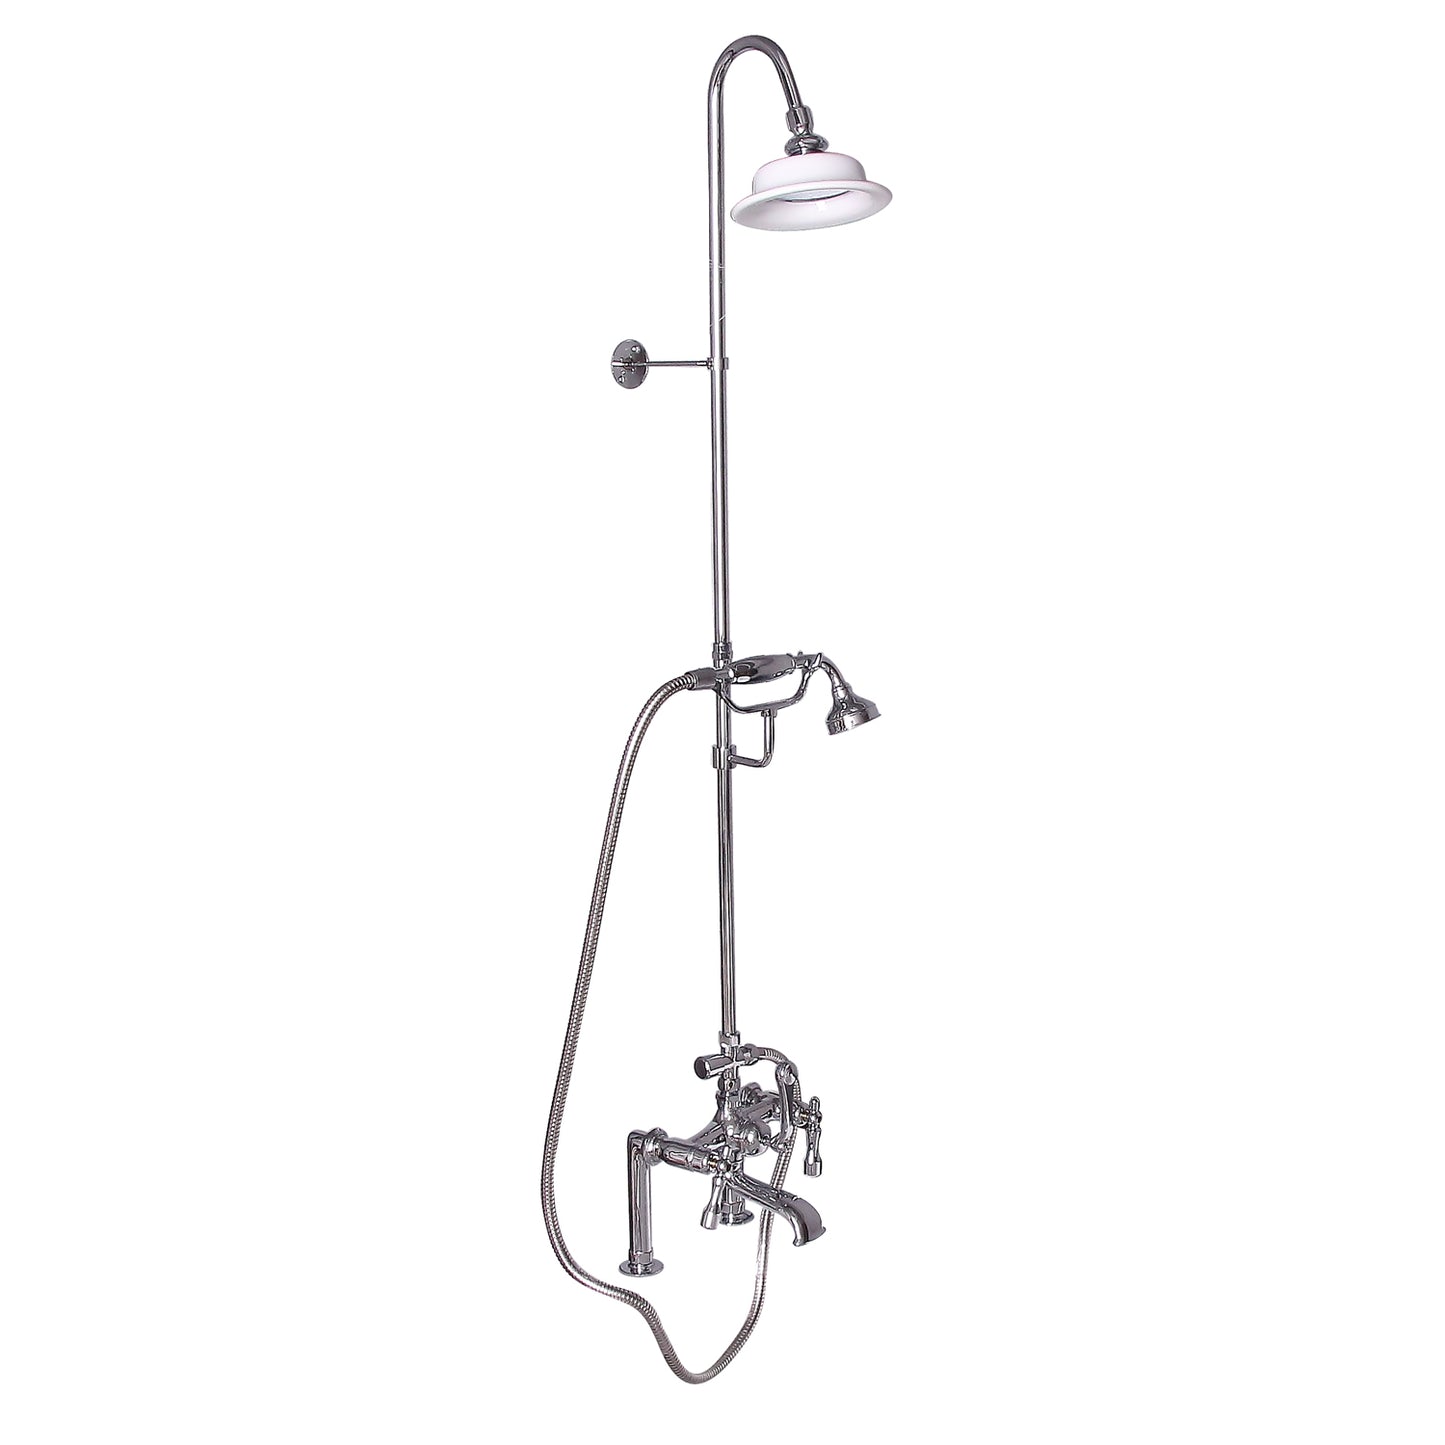 Tub Faucet Kit with 62" Riser, Shower Head, Hand Shower, Finial Handles in Chrome